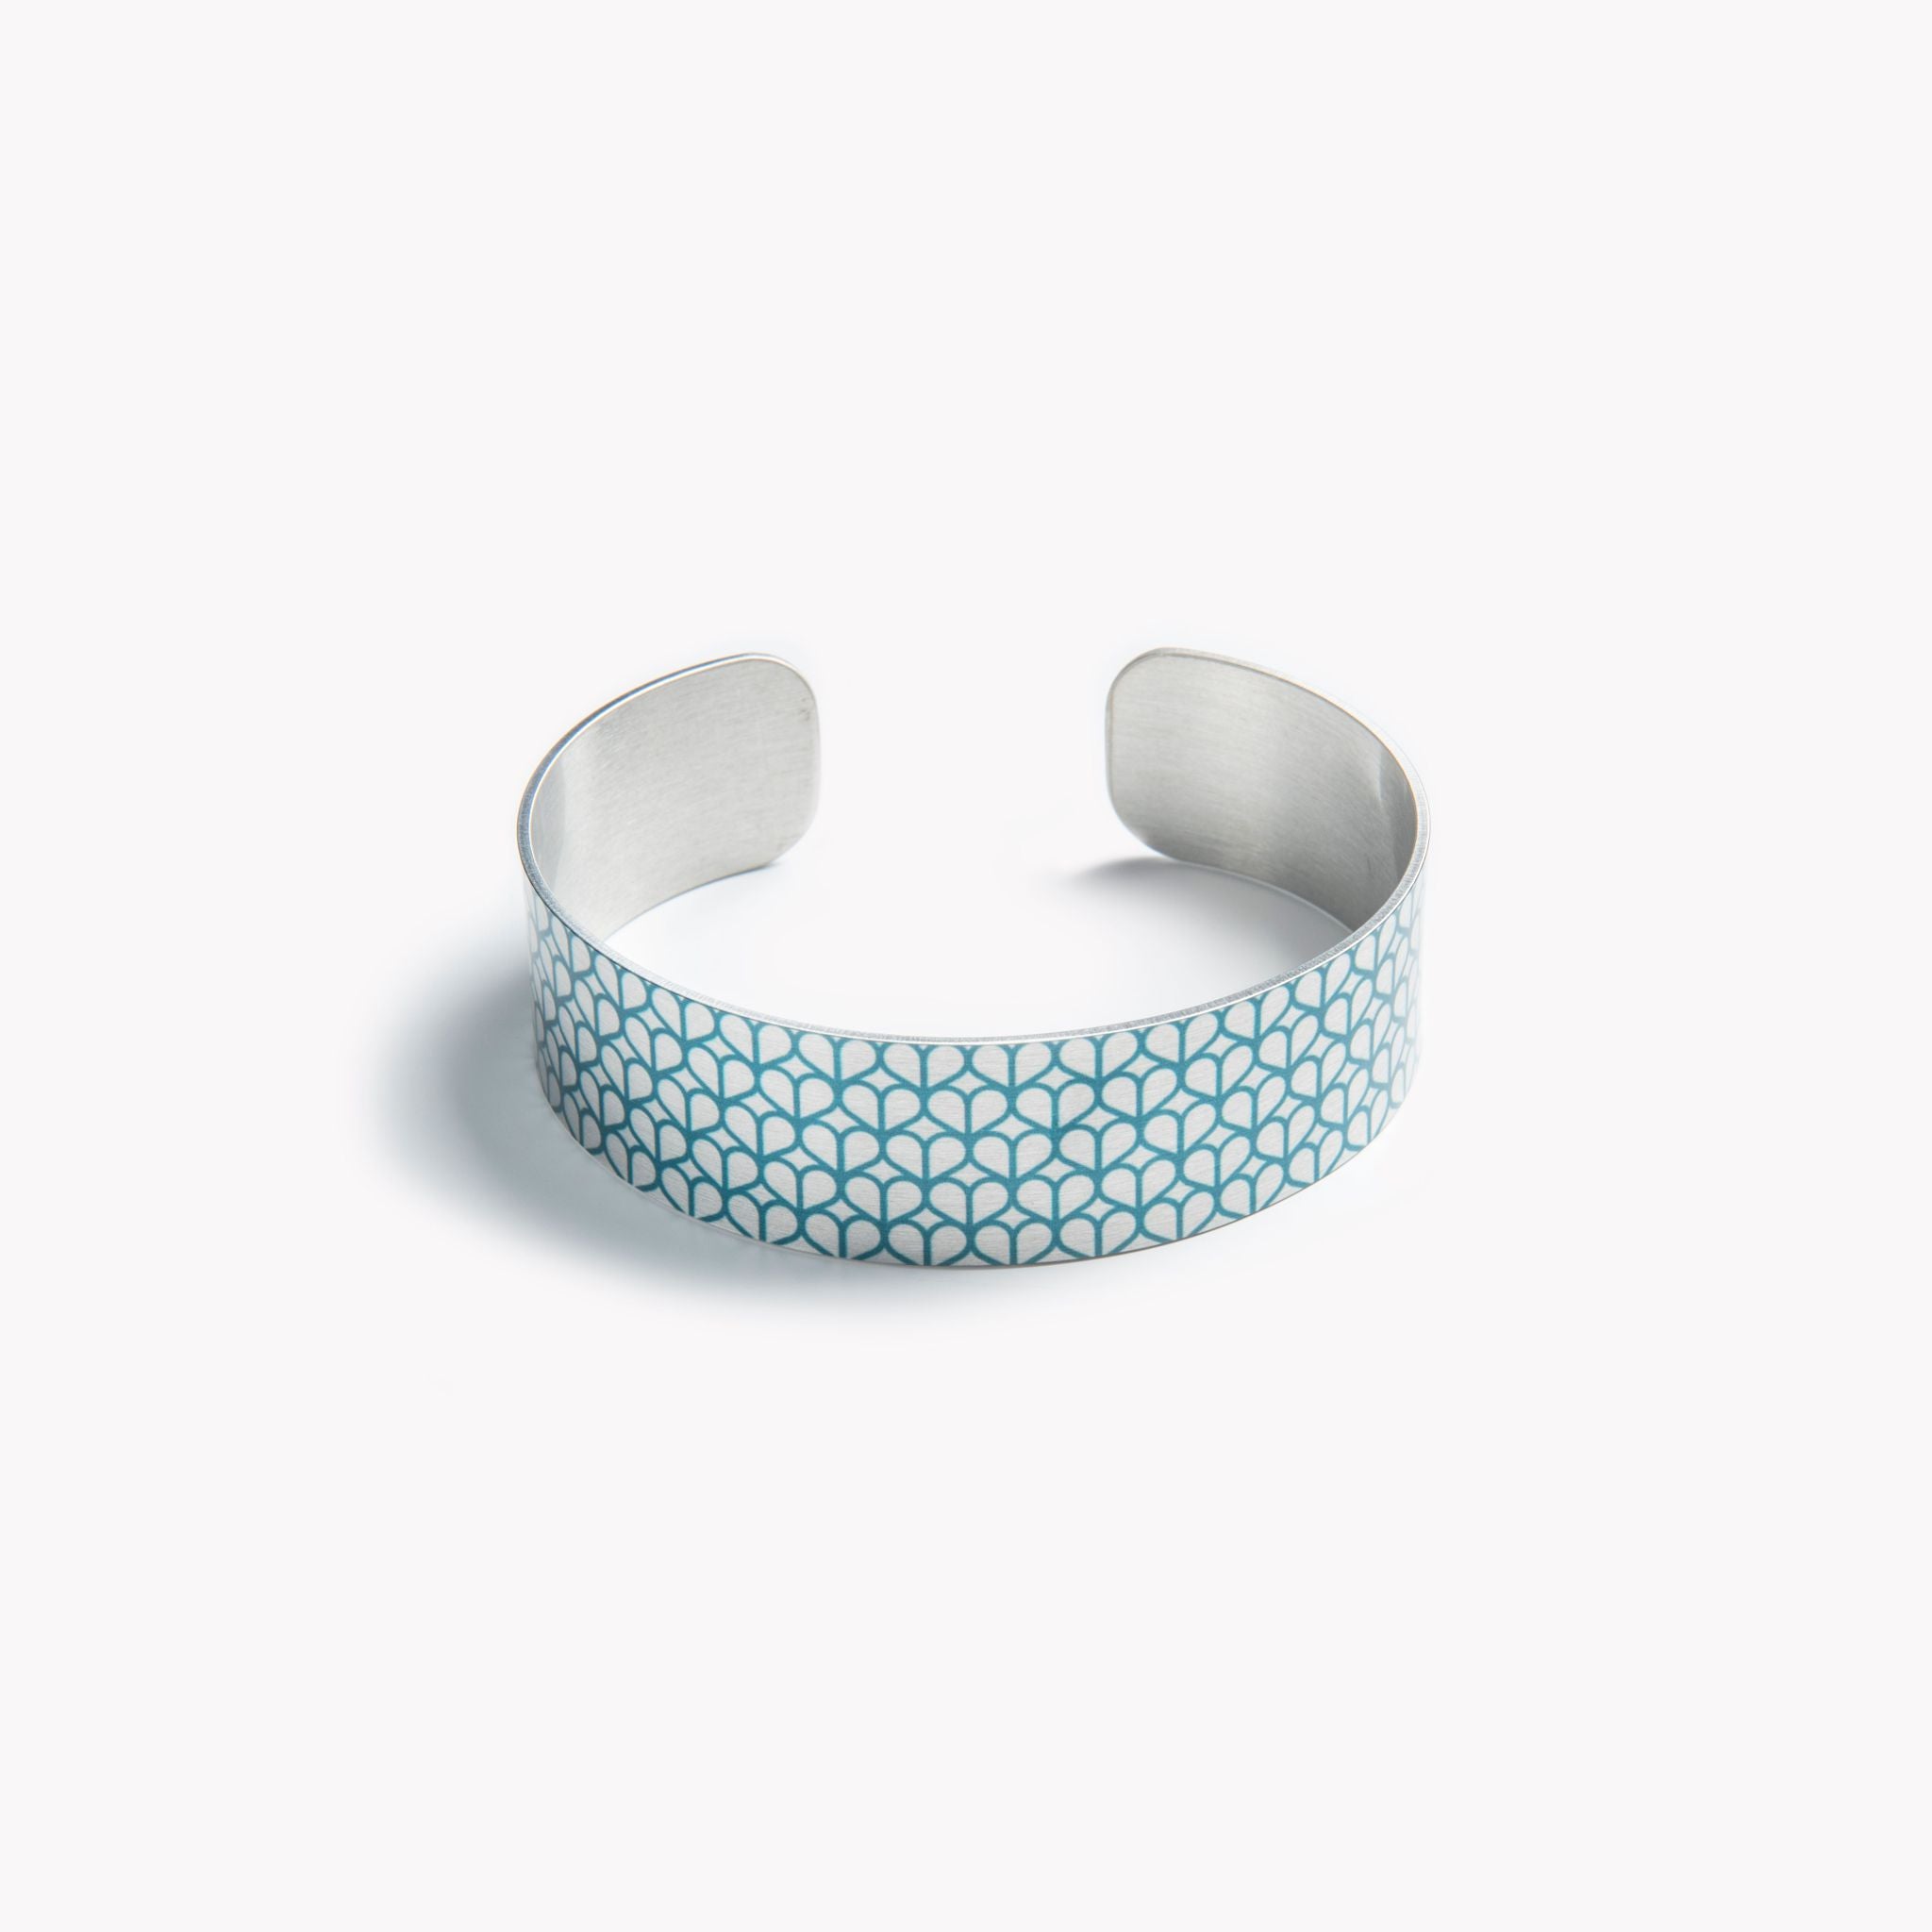 An aluminium cuff bracelet with an intricate heart surface pattern, in teal.